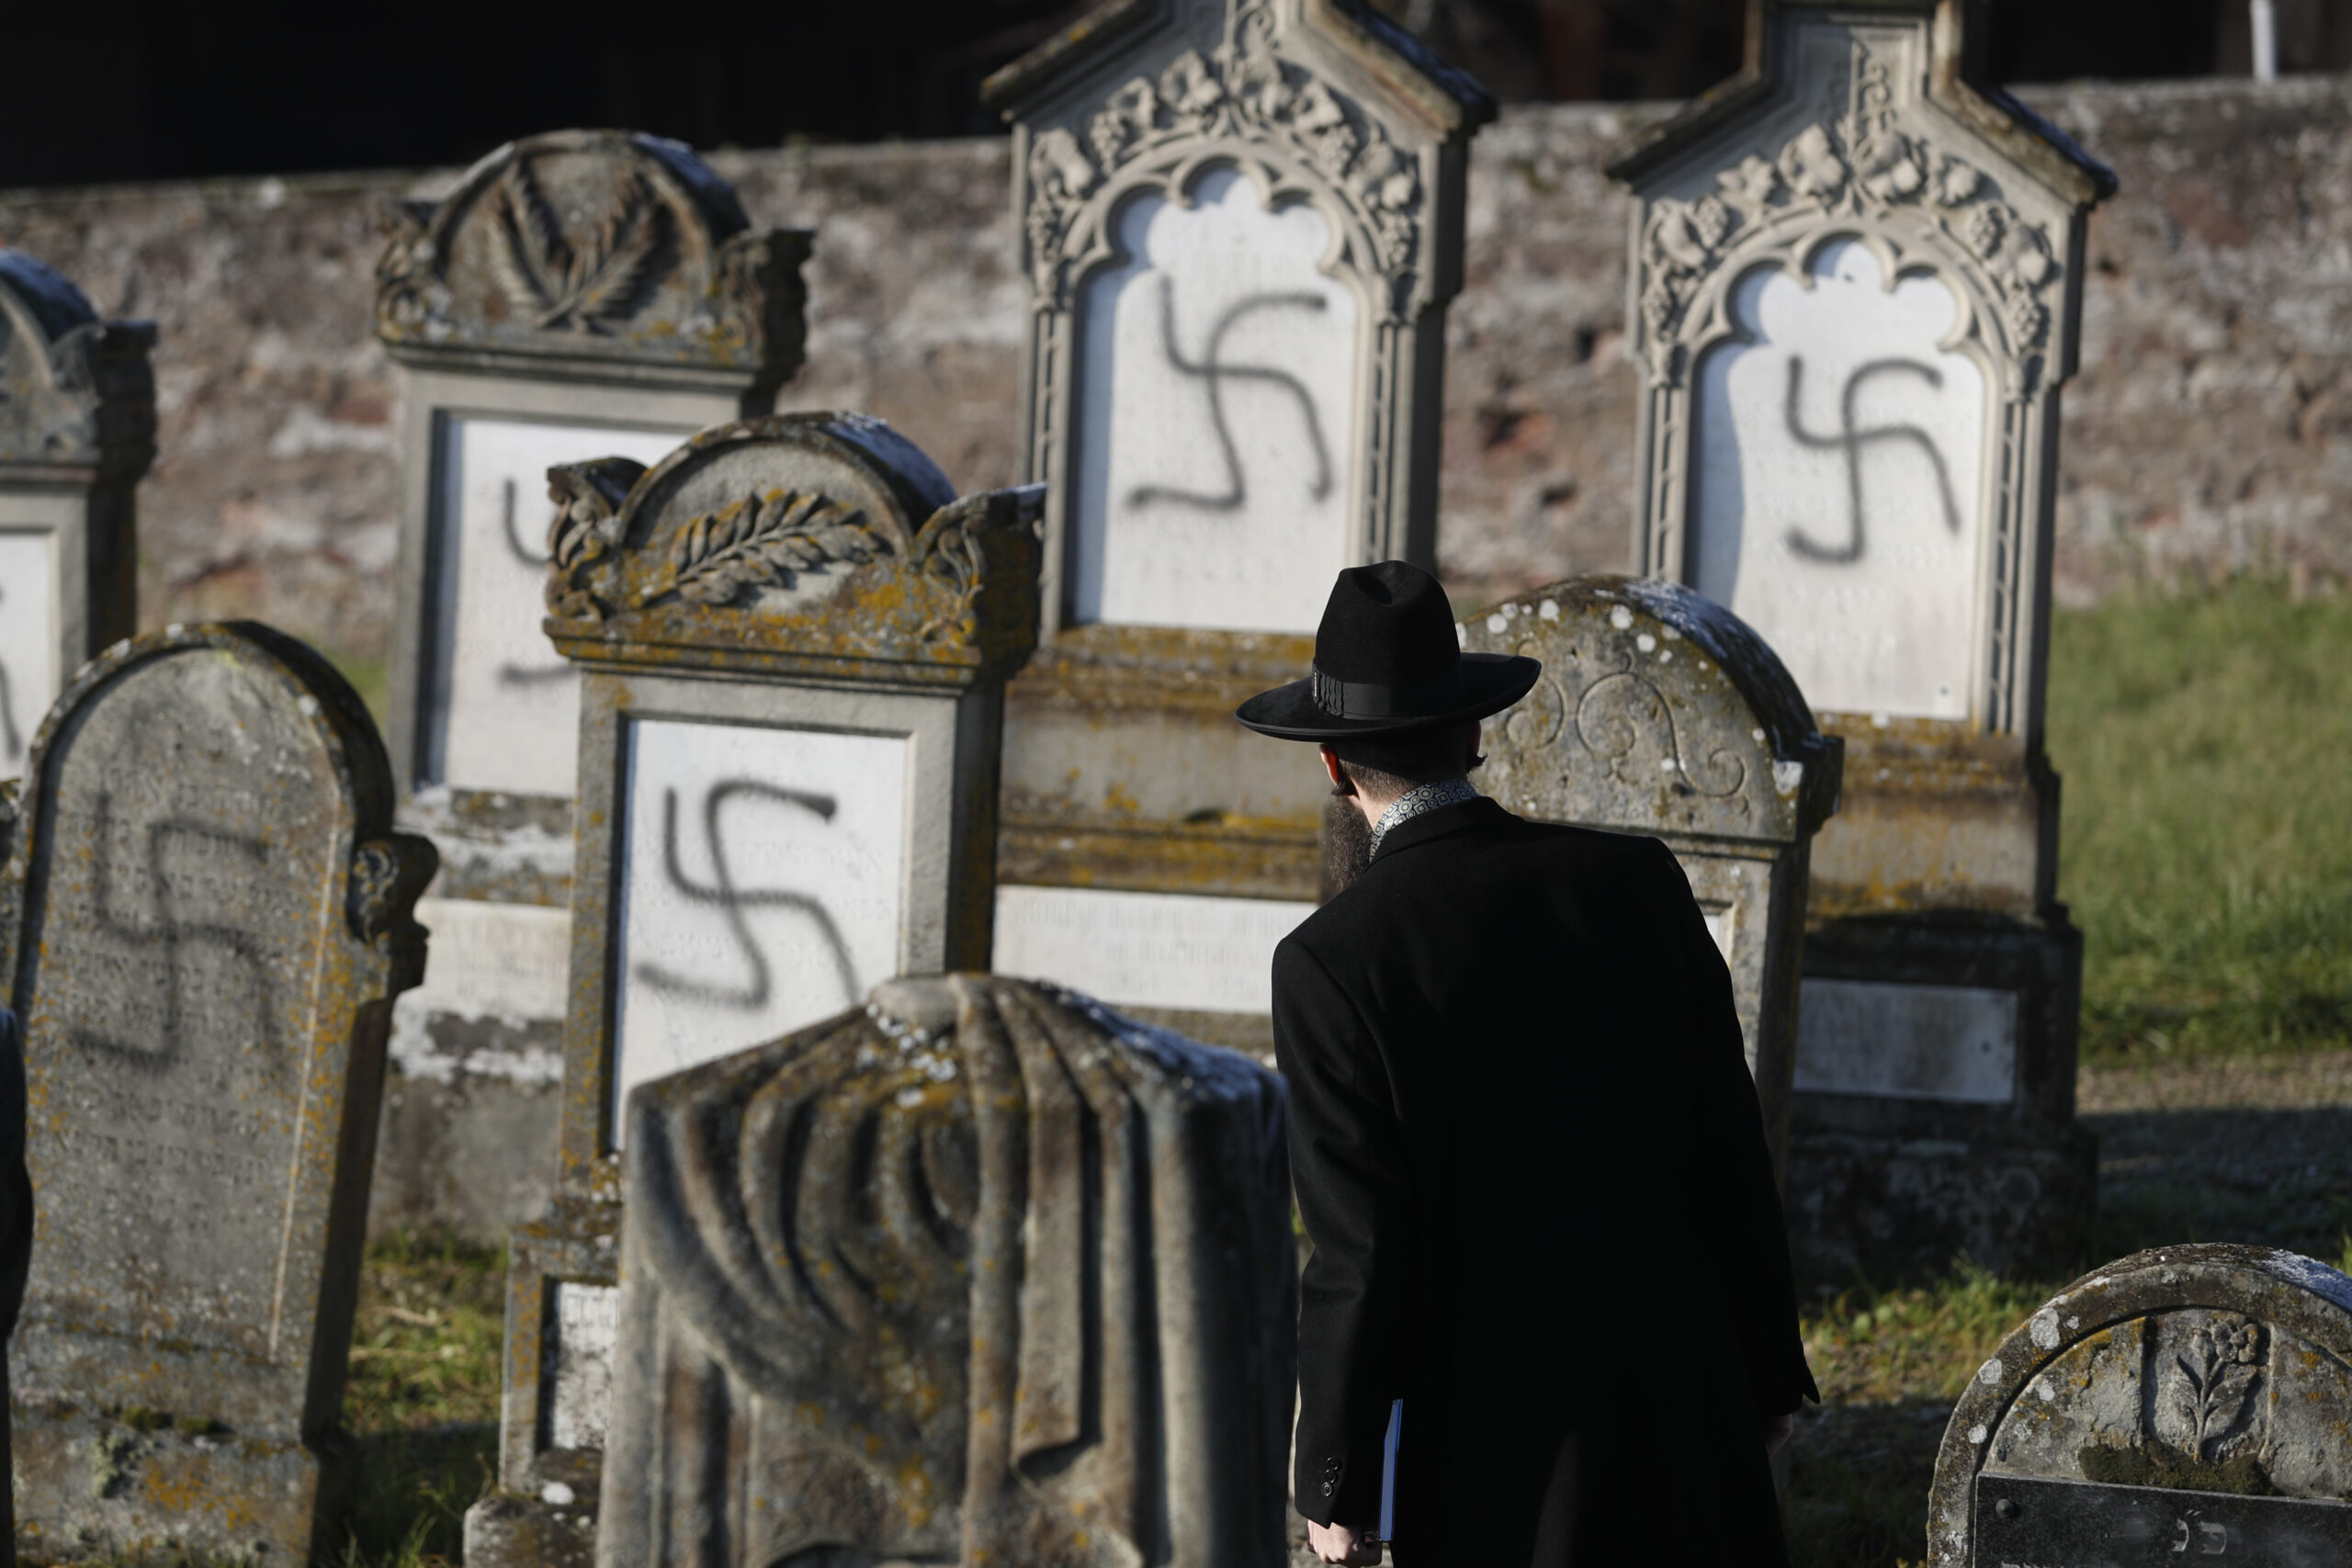 FILE - In this Dec. 4, 2019 file photo, Strasbourg chief Rabbi Harold Abraham Weill looks at vandalized tombs in the Jewish cemetery of Westhoffen, west of the city of Strasbourg, eastern France. Coronavirus lockdowns in 2020 shifted some anti-Semitic hatred online, where conspiracy theories blaming Jews for the pandemic’s medical and economic devastation abounded, Israeli researchers at Tel Aviv University's Kantor Center for the Study of Contemporary European Jewry in an annual report Wednesday, April 7, 2021. (AP Photo/Jean-Francois Badias, File)